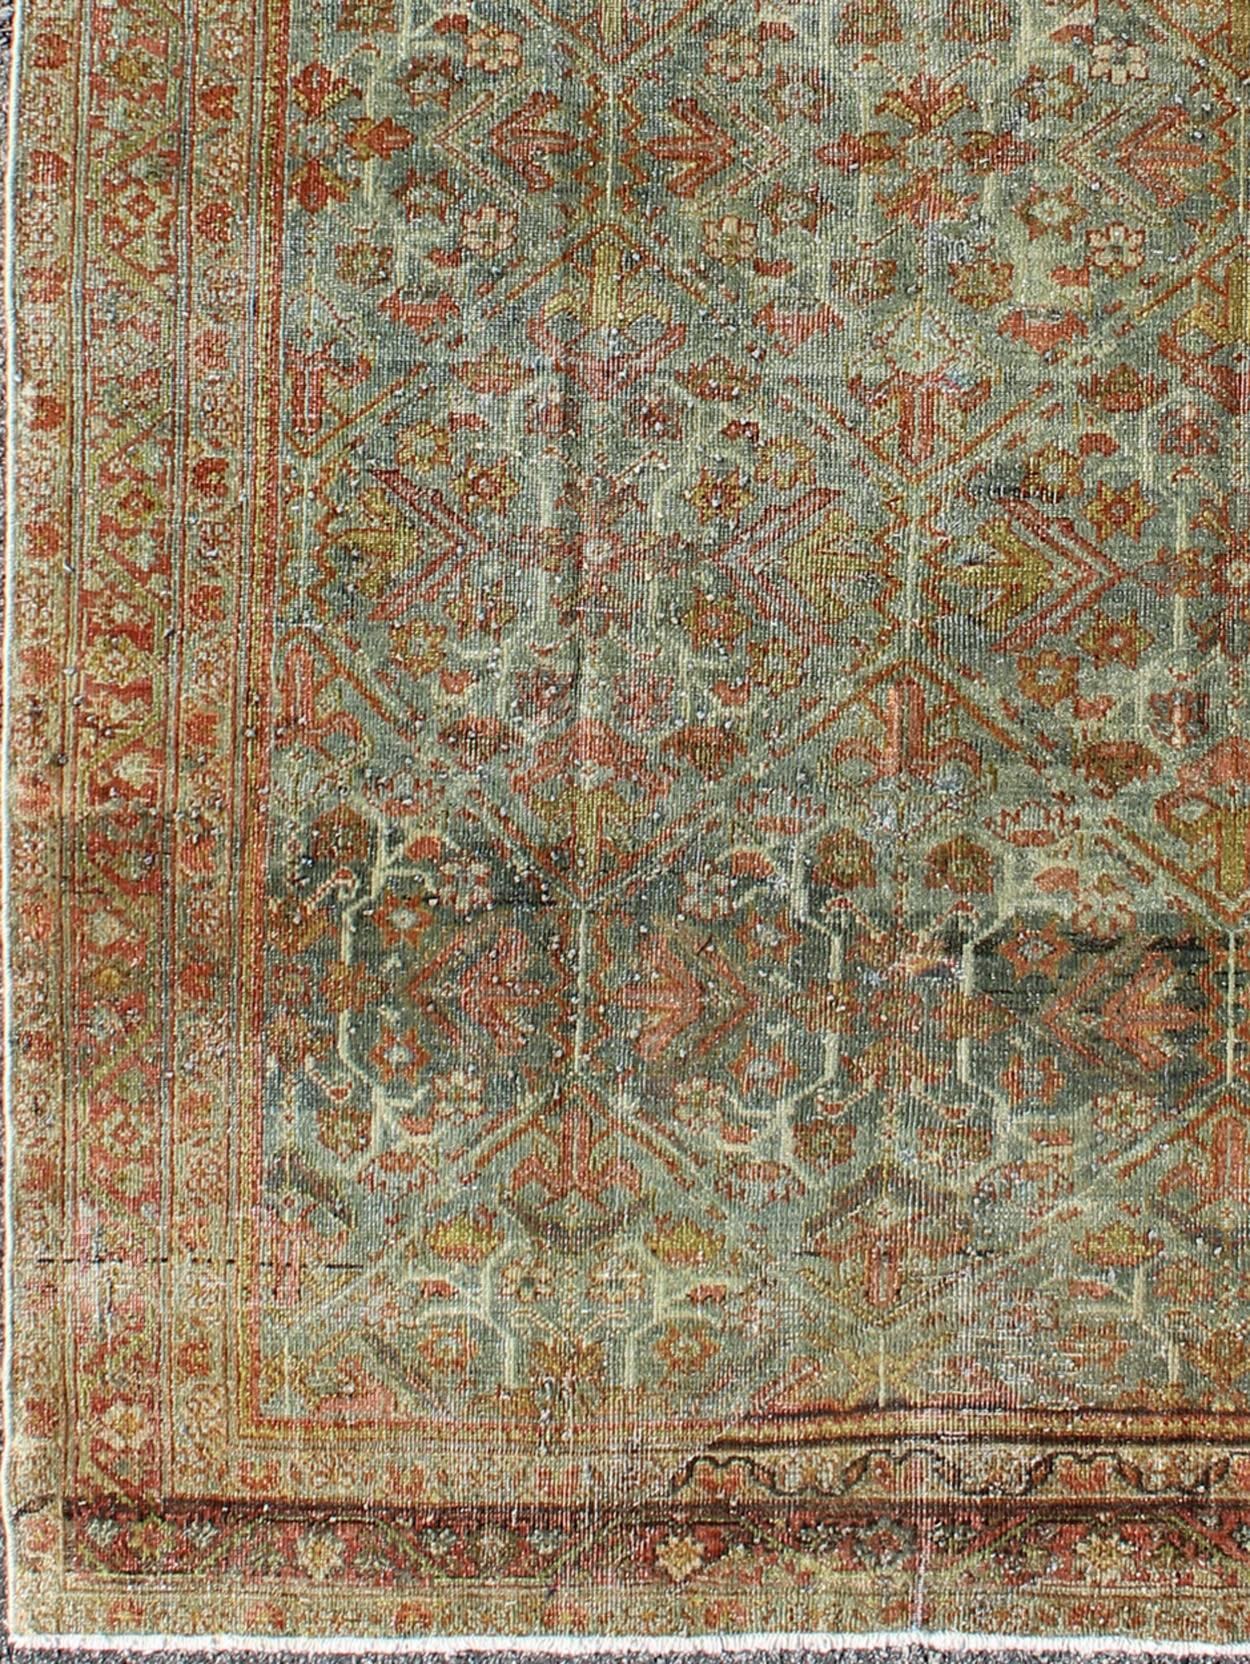 Antique Persian Mahal rug with flowing floral pattern in gray, red, acid yellow, rug gld-8797, country of origin / type: Iran / Sultanabad, circa 1920s

This antique Persian Sultanabad Mahal rug, circa 1920s relies heavily on exquisite details as